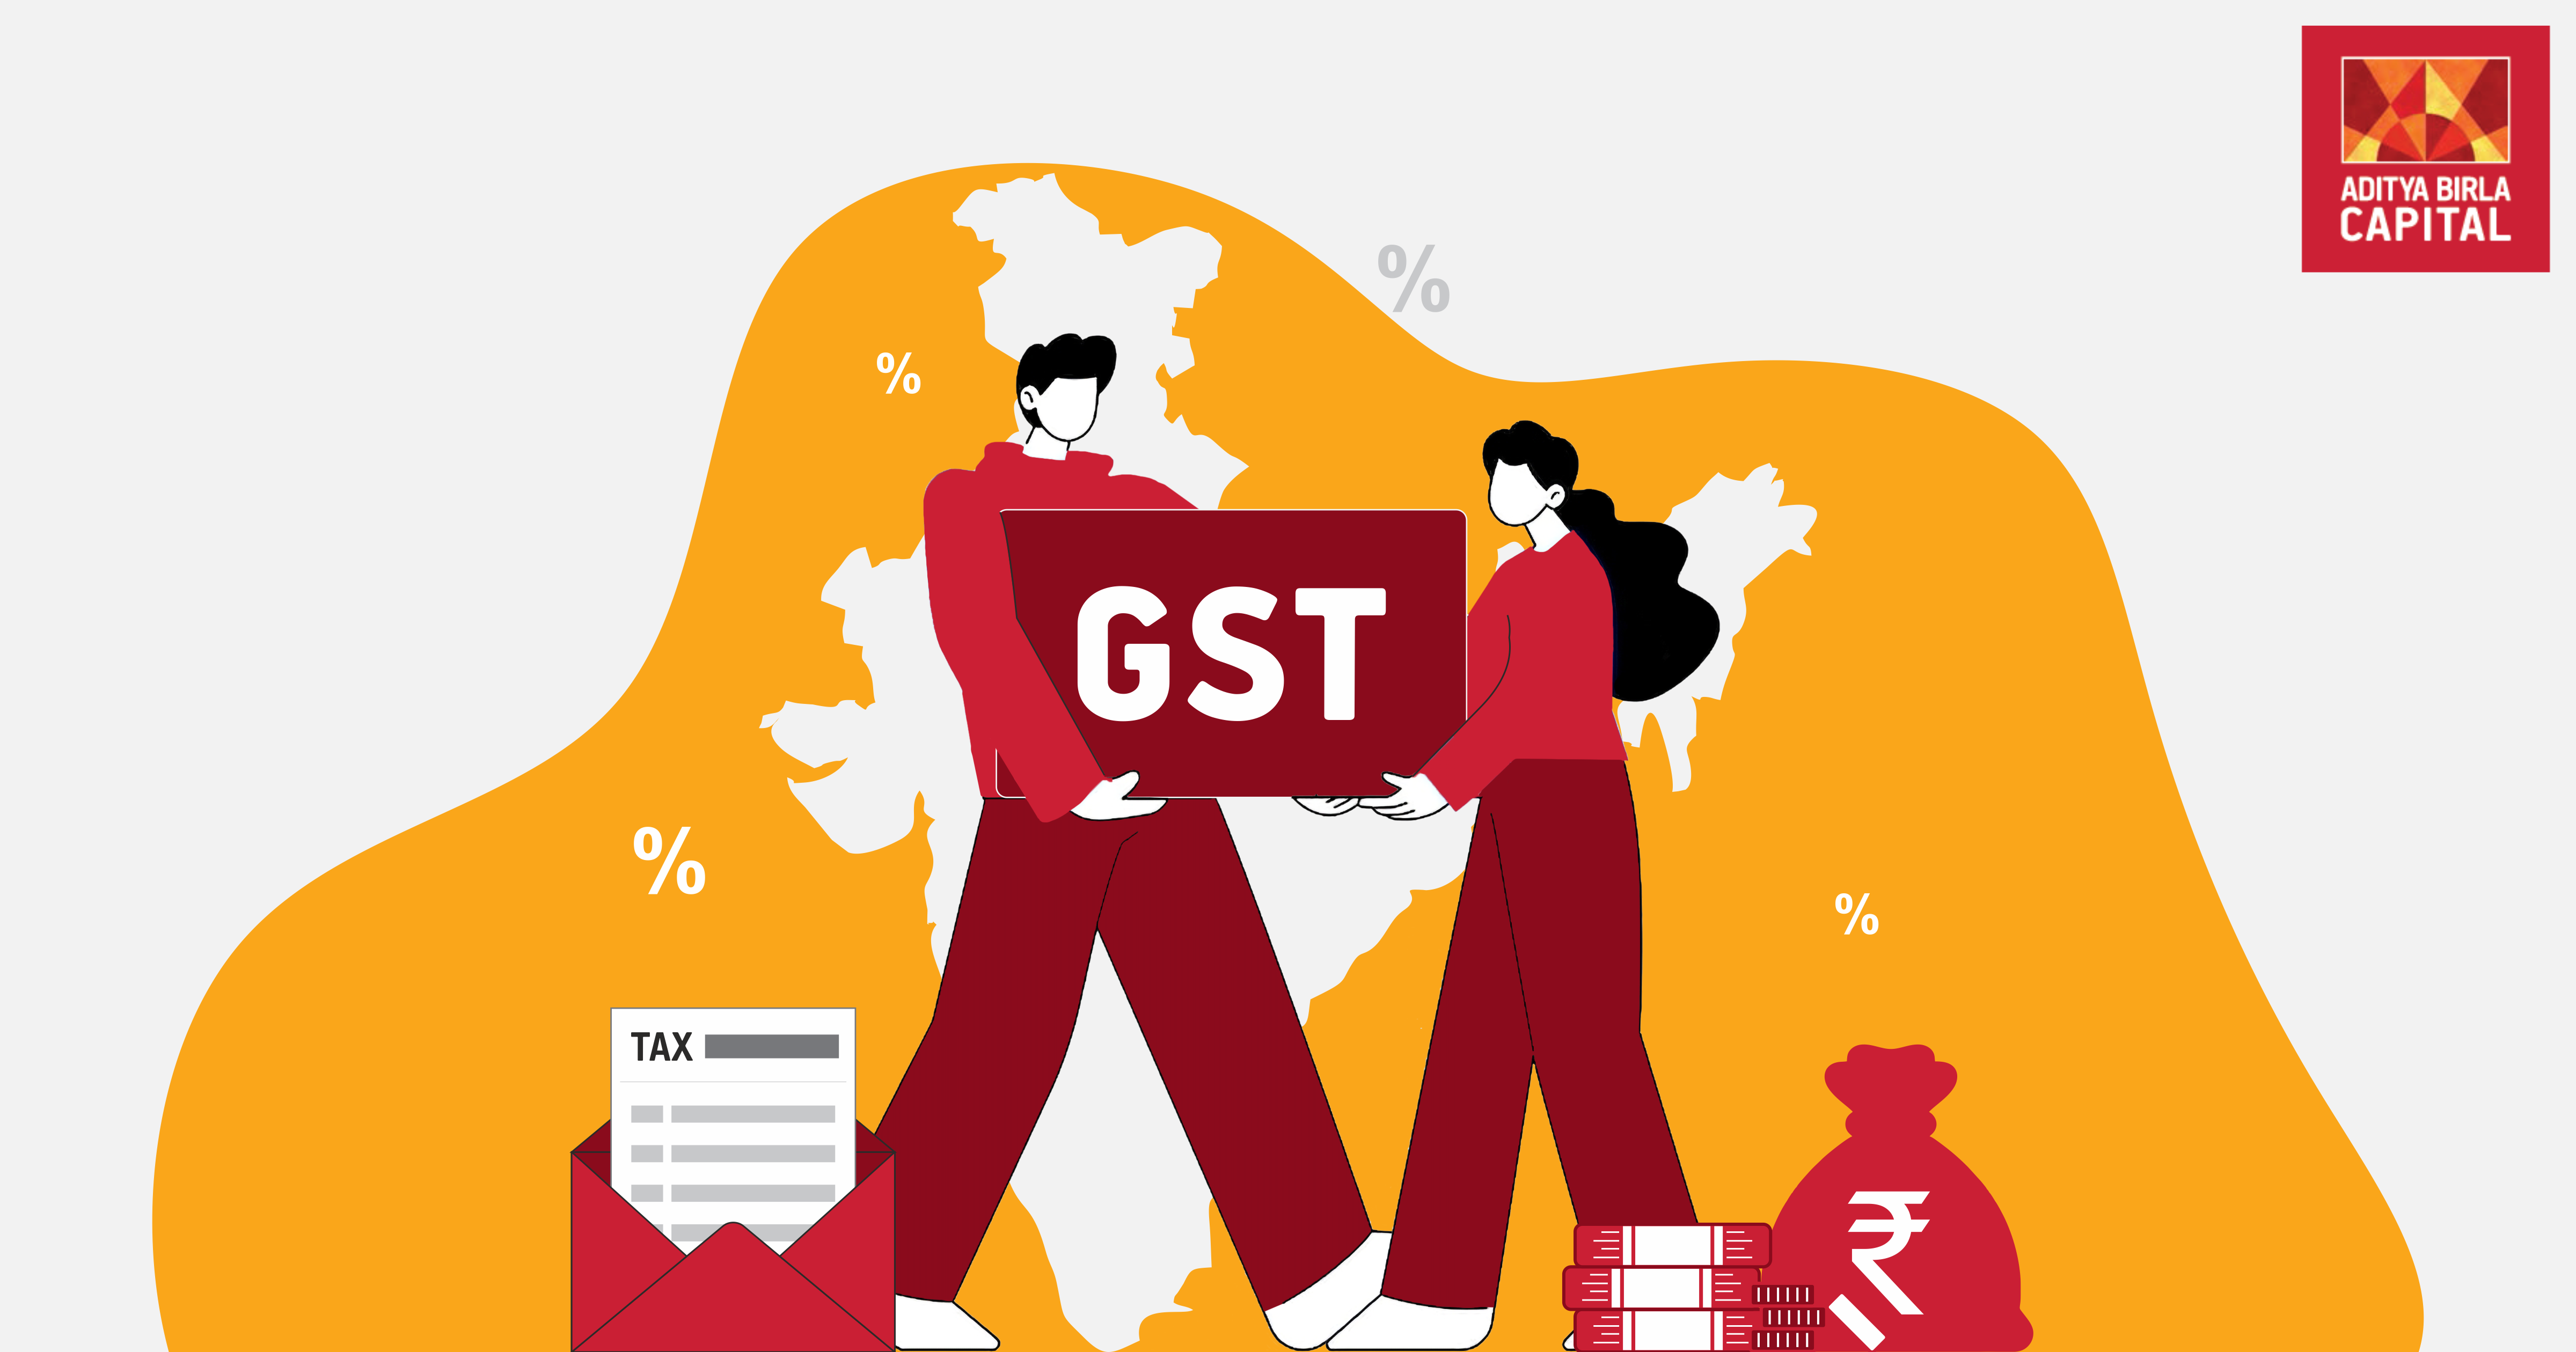 A Complete Overview of GST Rates in India